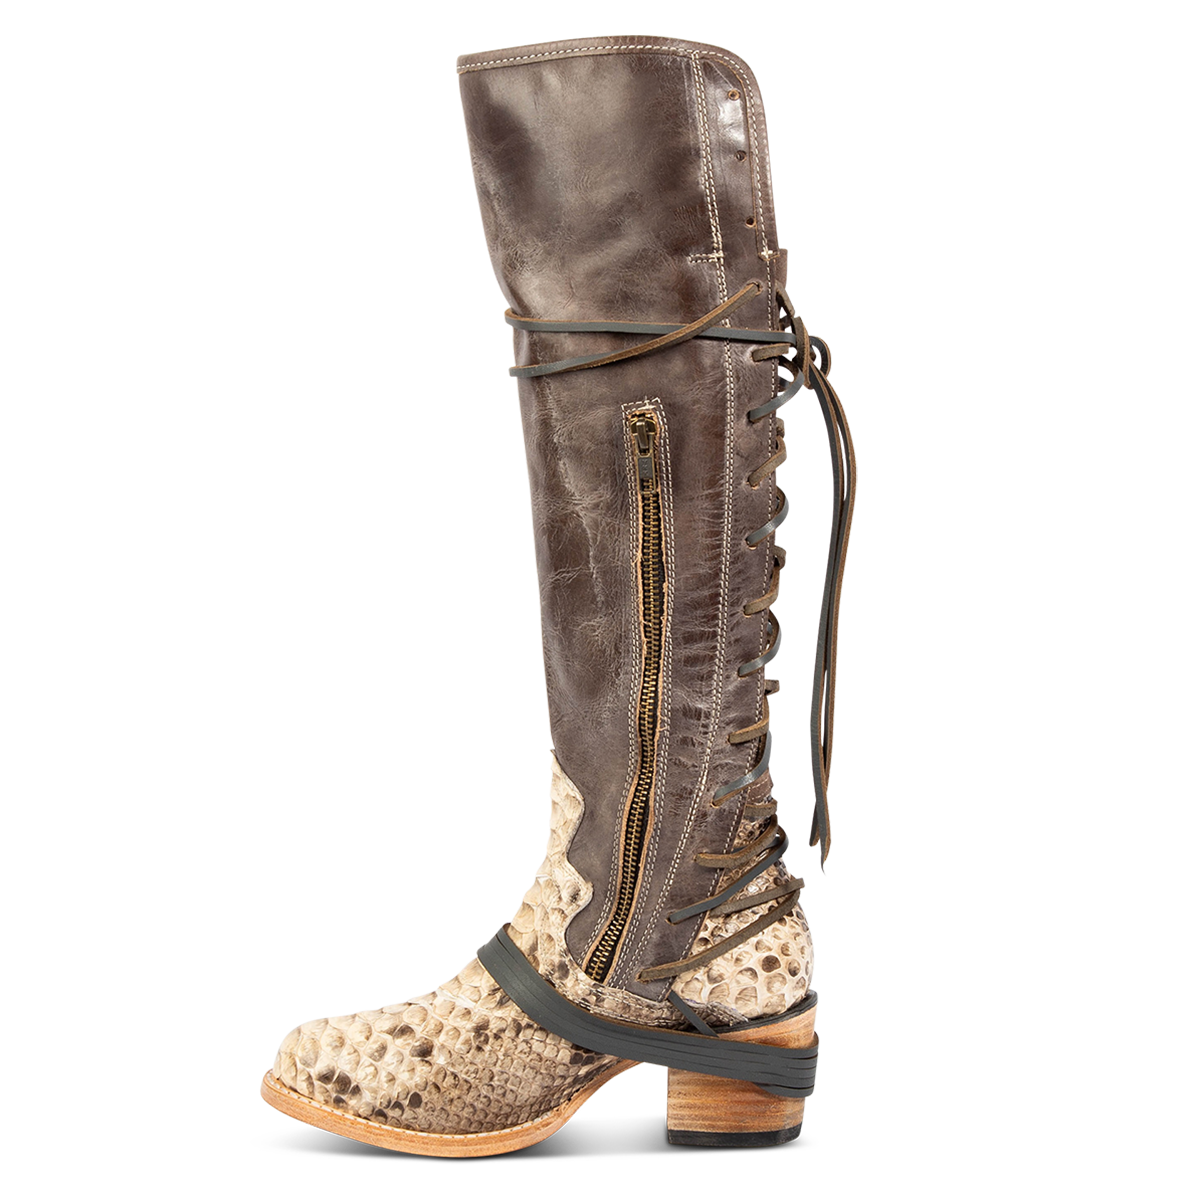 Inside view showing working brass zip closure and adjustable wrap around laces on FREEBIRD women's Coal black/beige python leather tall boot